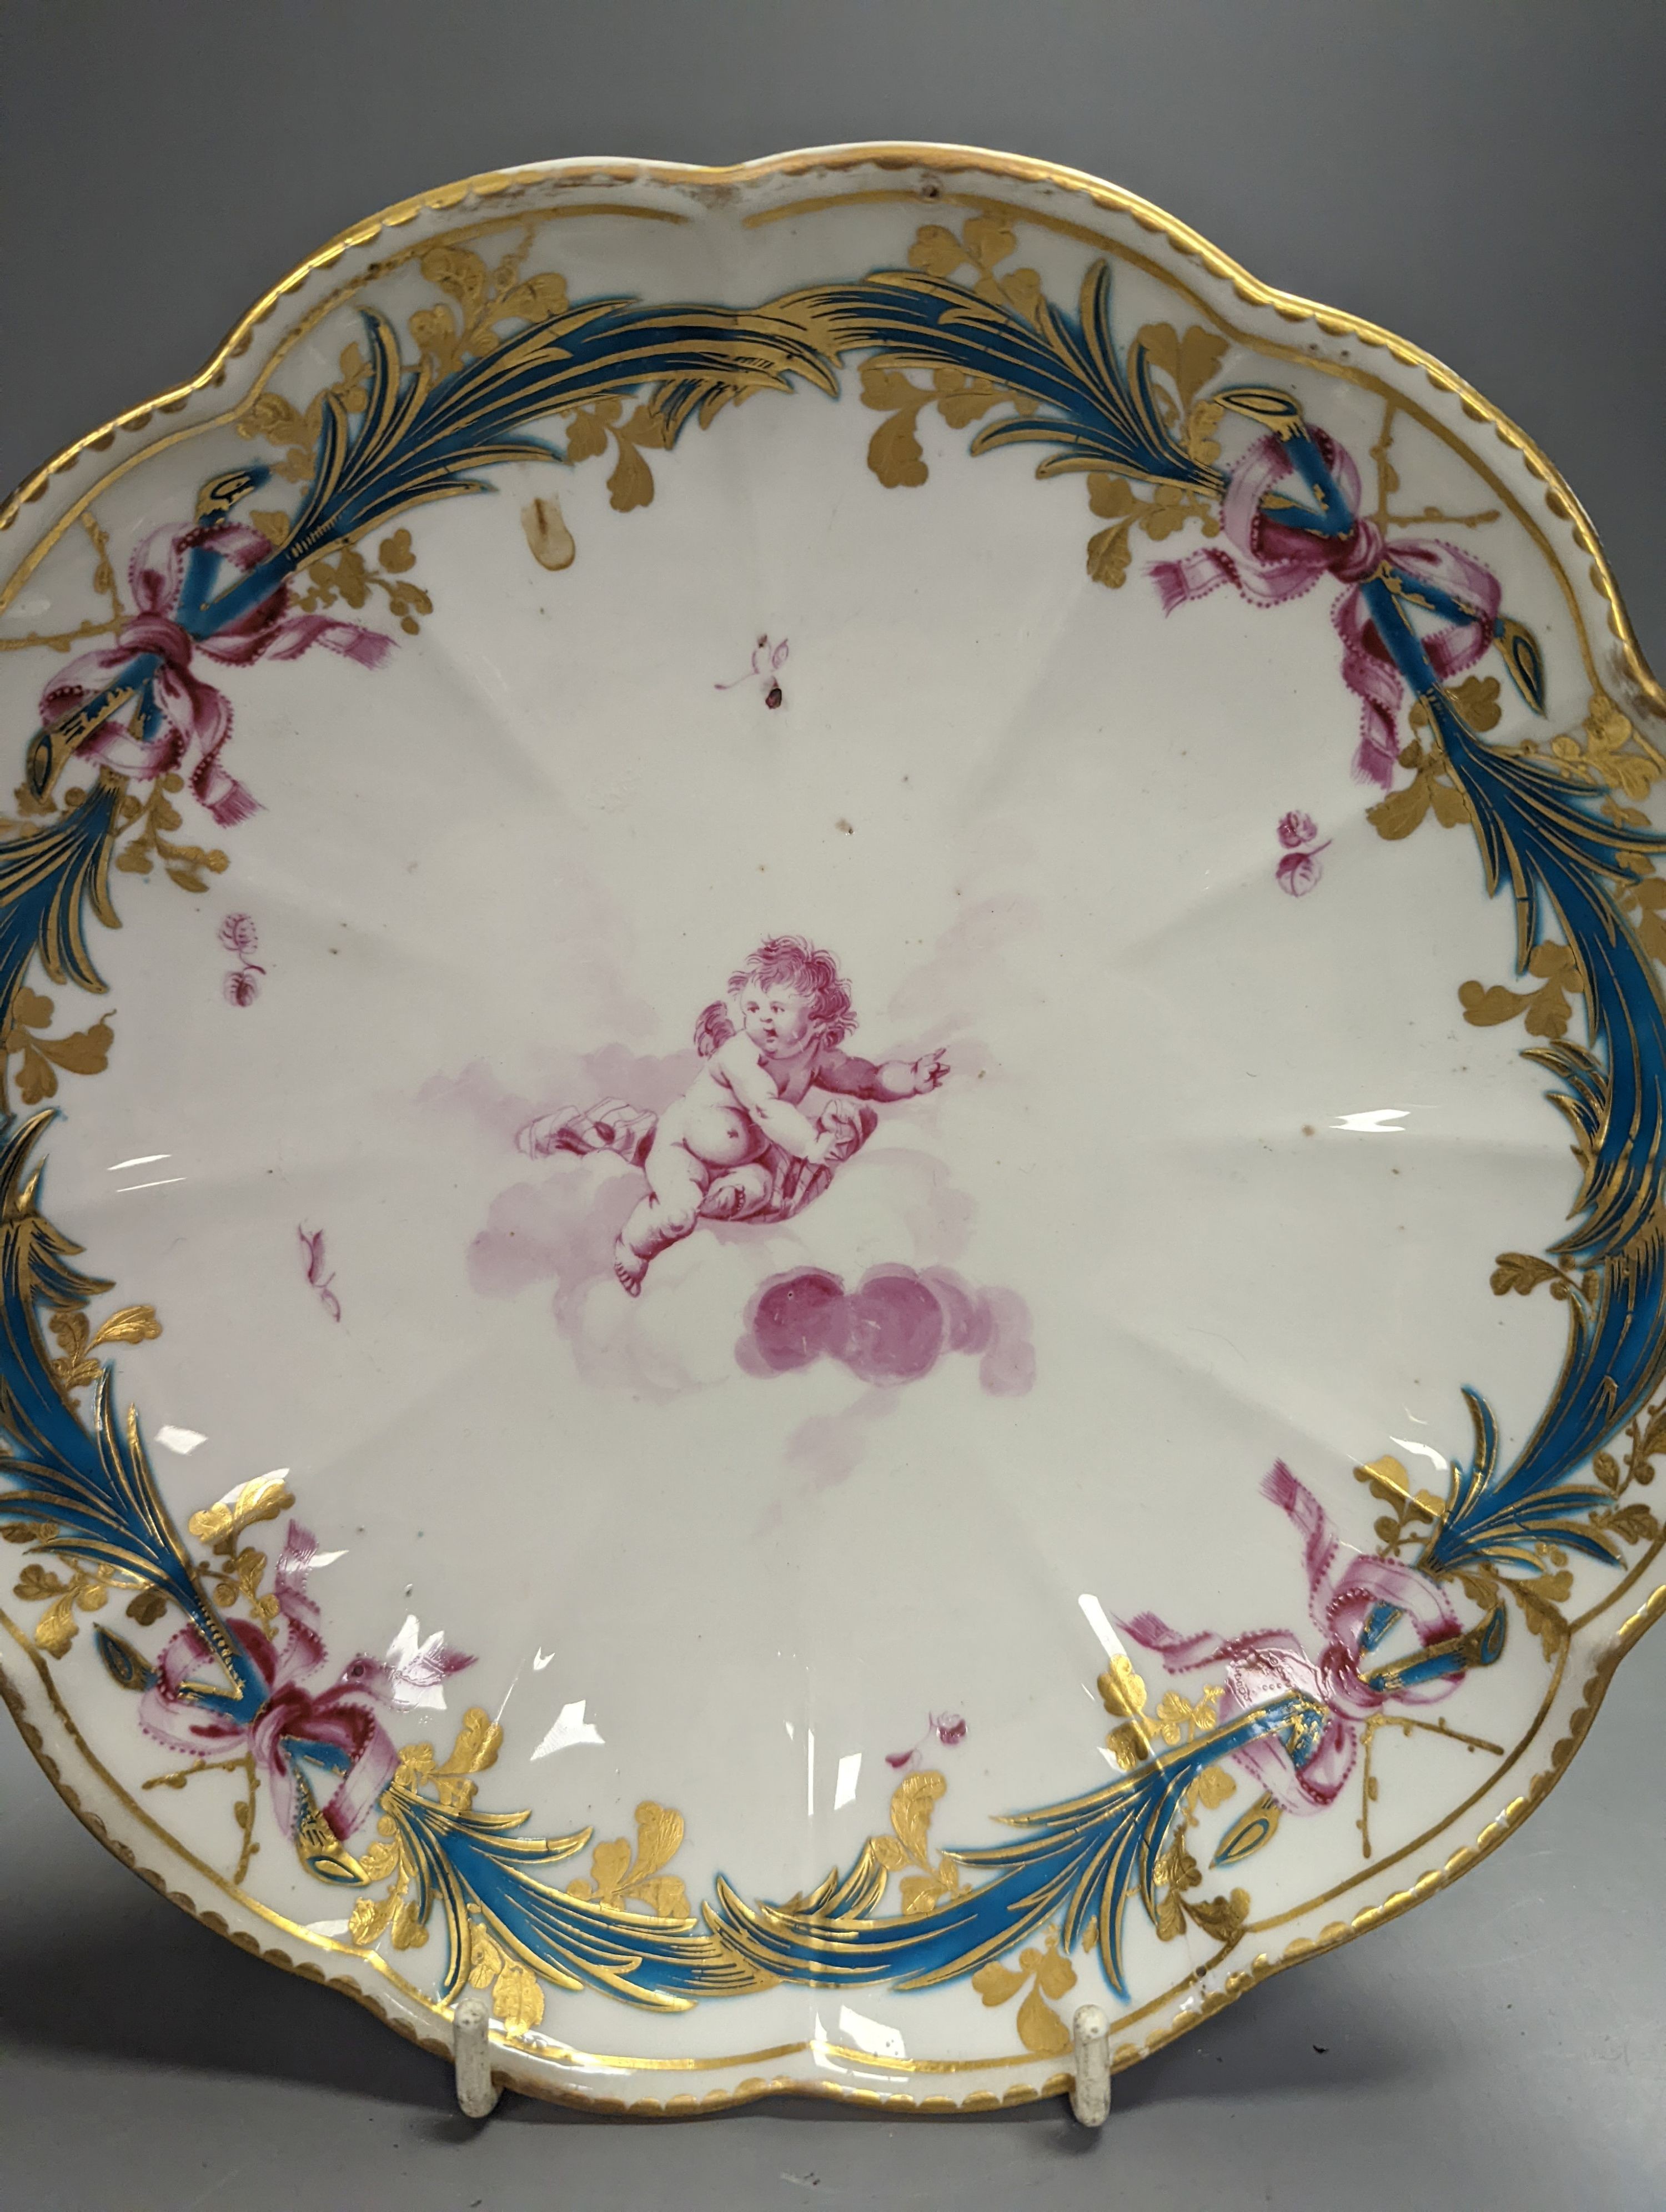 A Chelsea-Derby circular dish painted in puce with a cherub floating on a cloud by Richard Askew, c.1775, 22cm